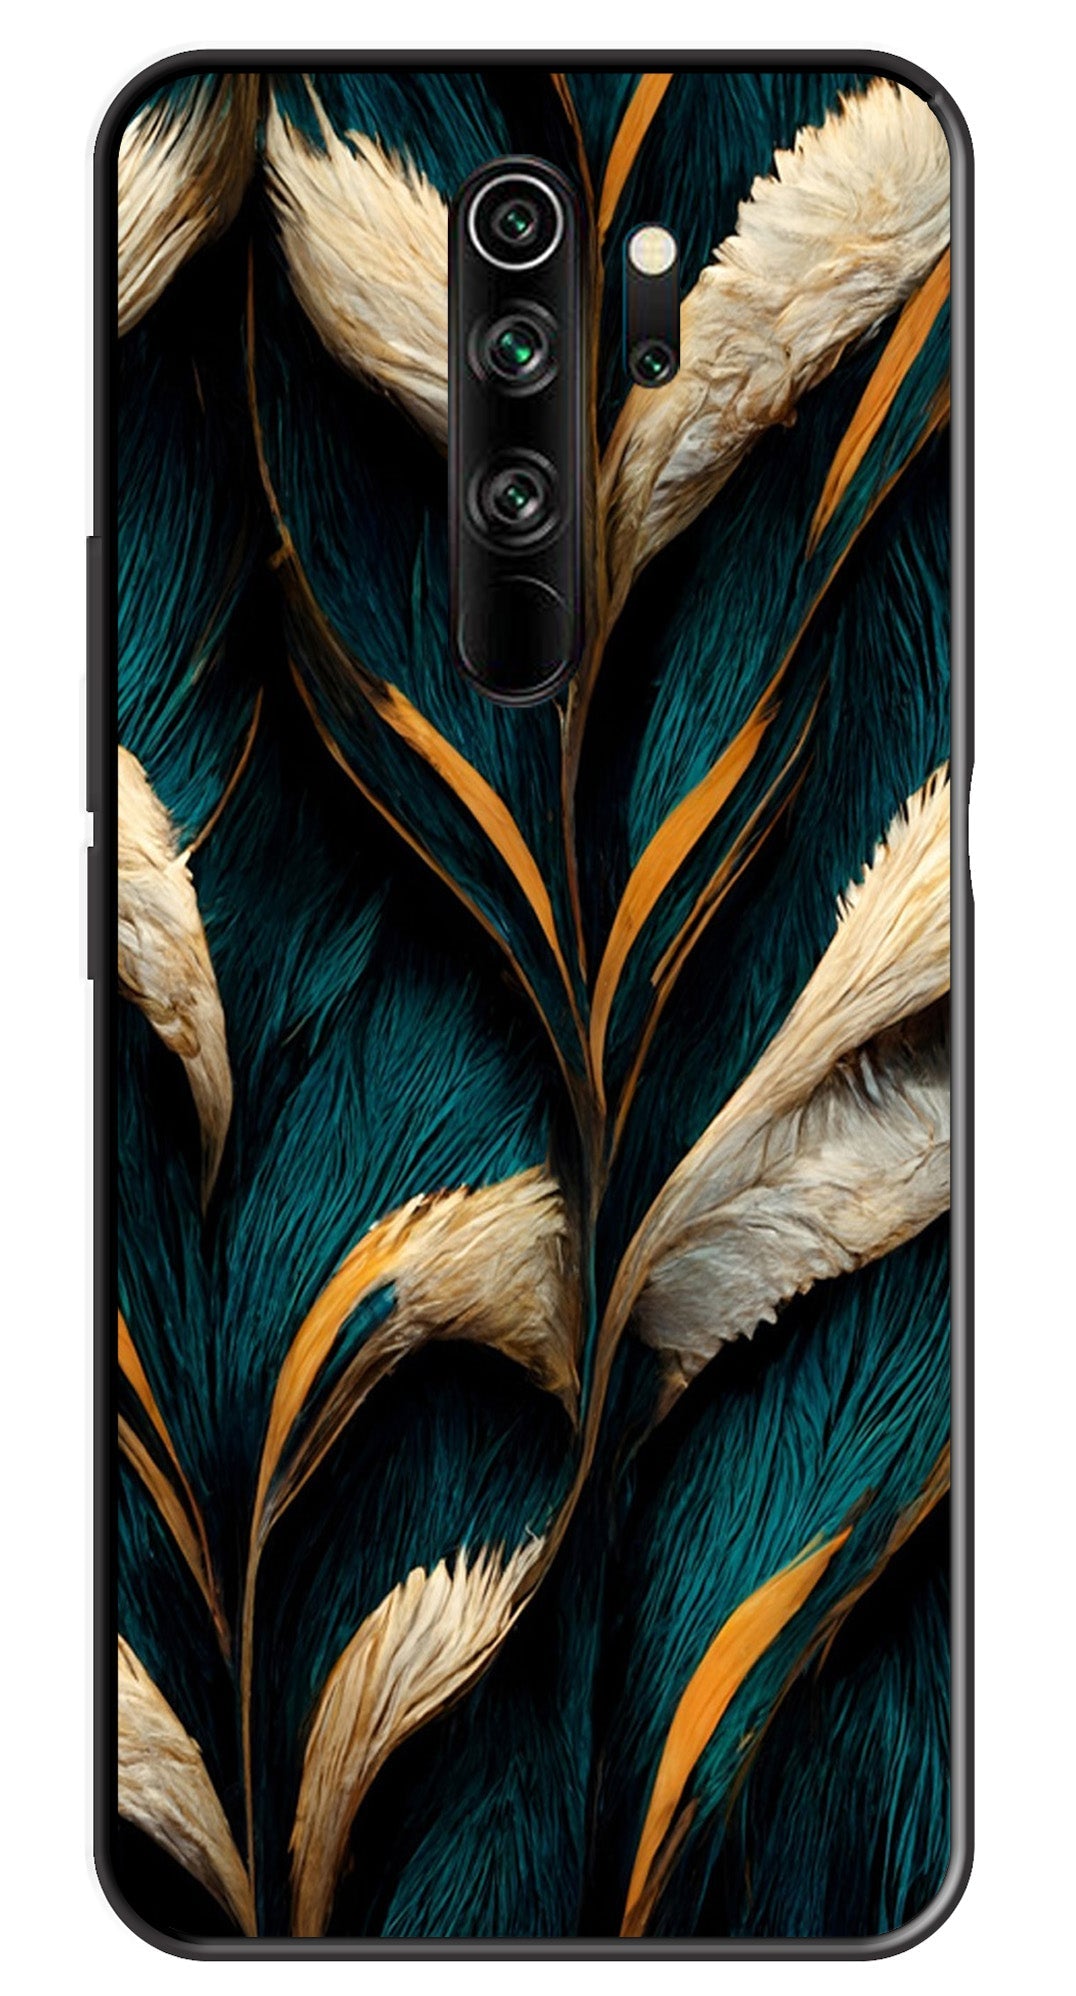 Feathers Metal Mobile Case for Redmi Note 8 Pro   (Design No -30)